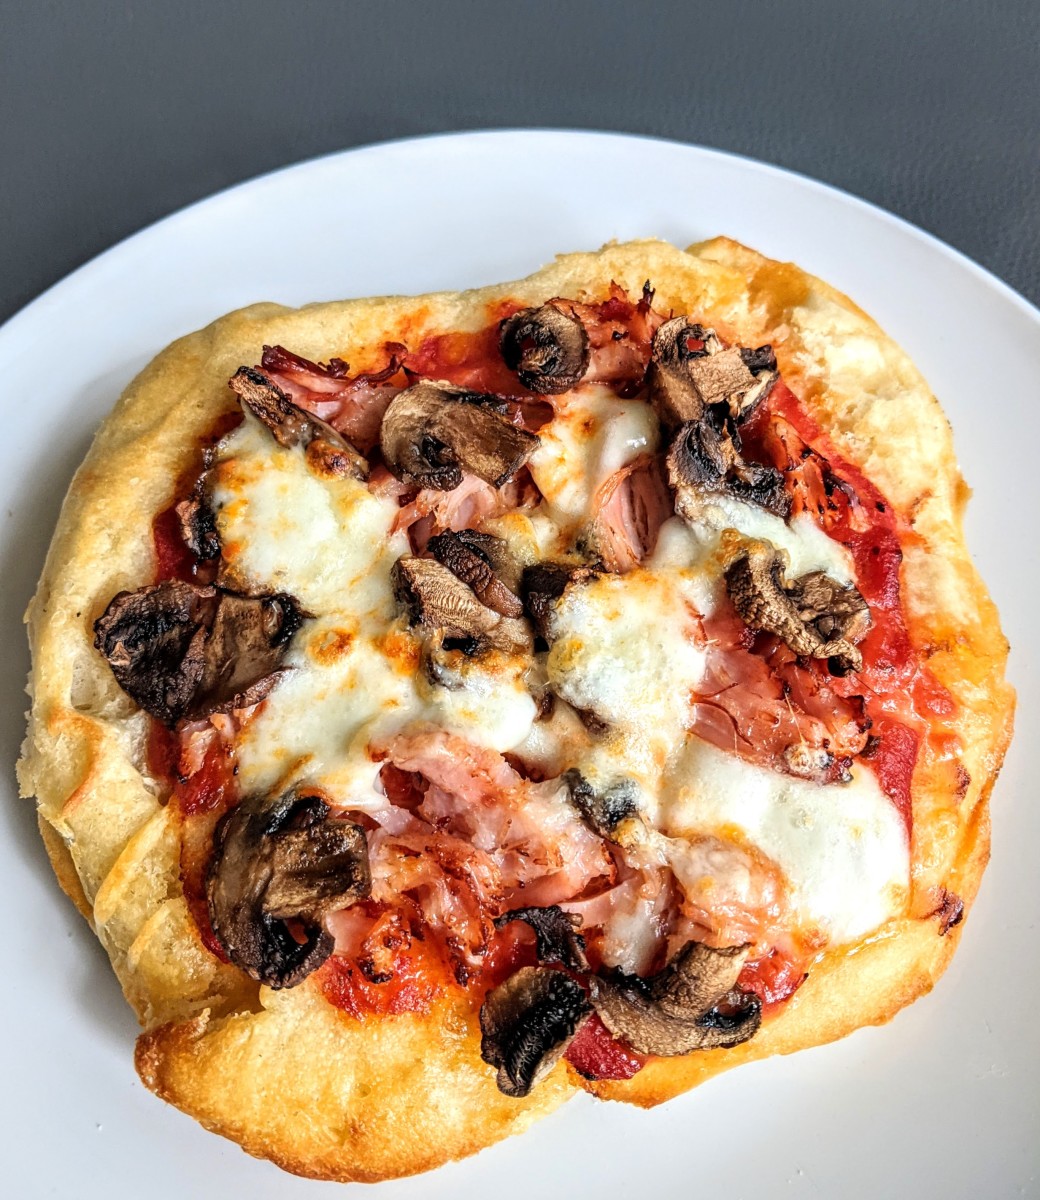 Pizzas are quite easy to bake in an air fryer